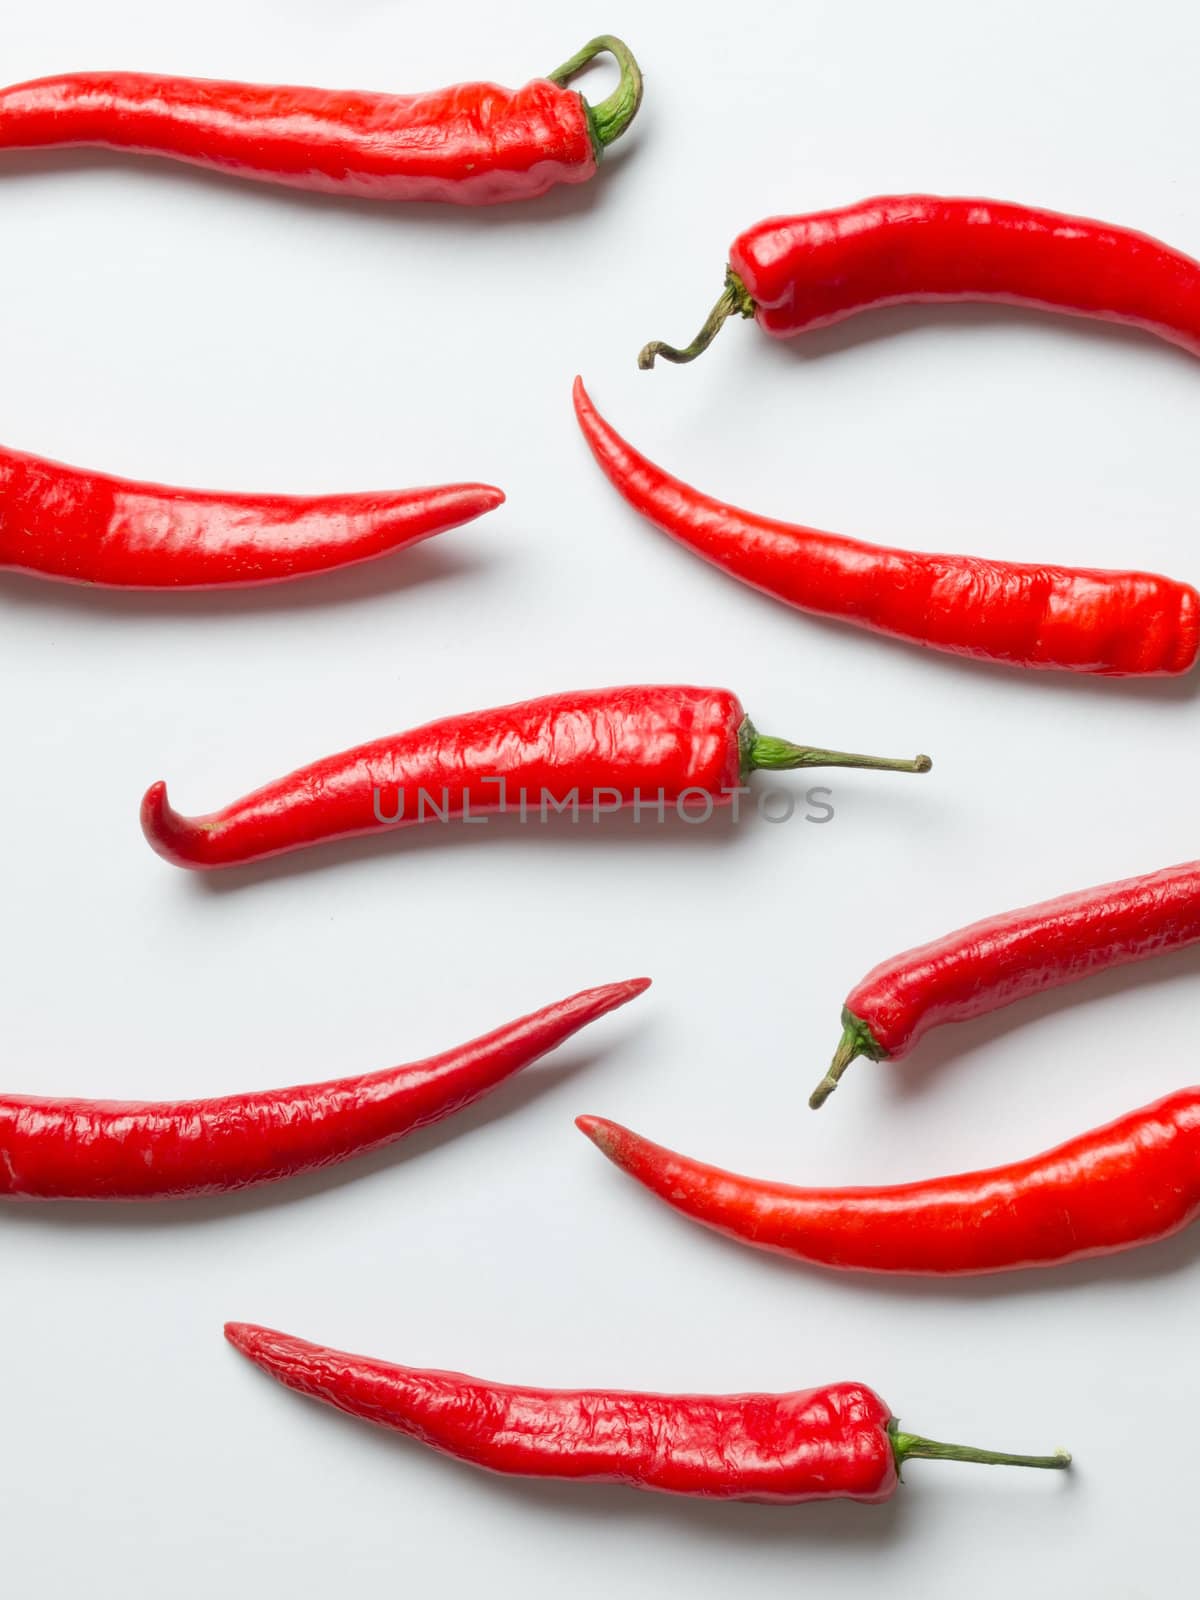 red chilies by zkruger